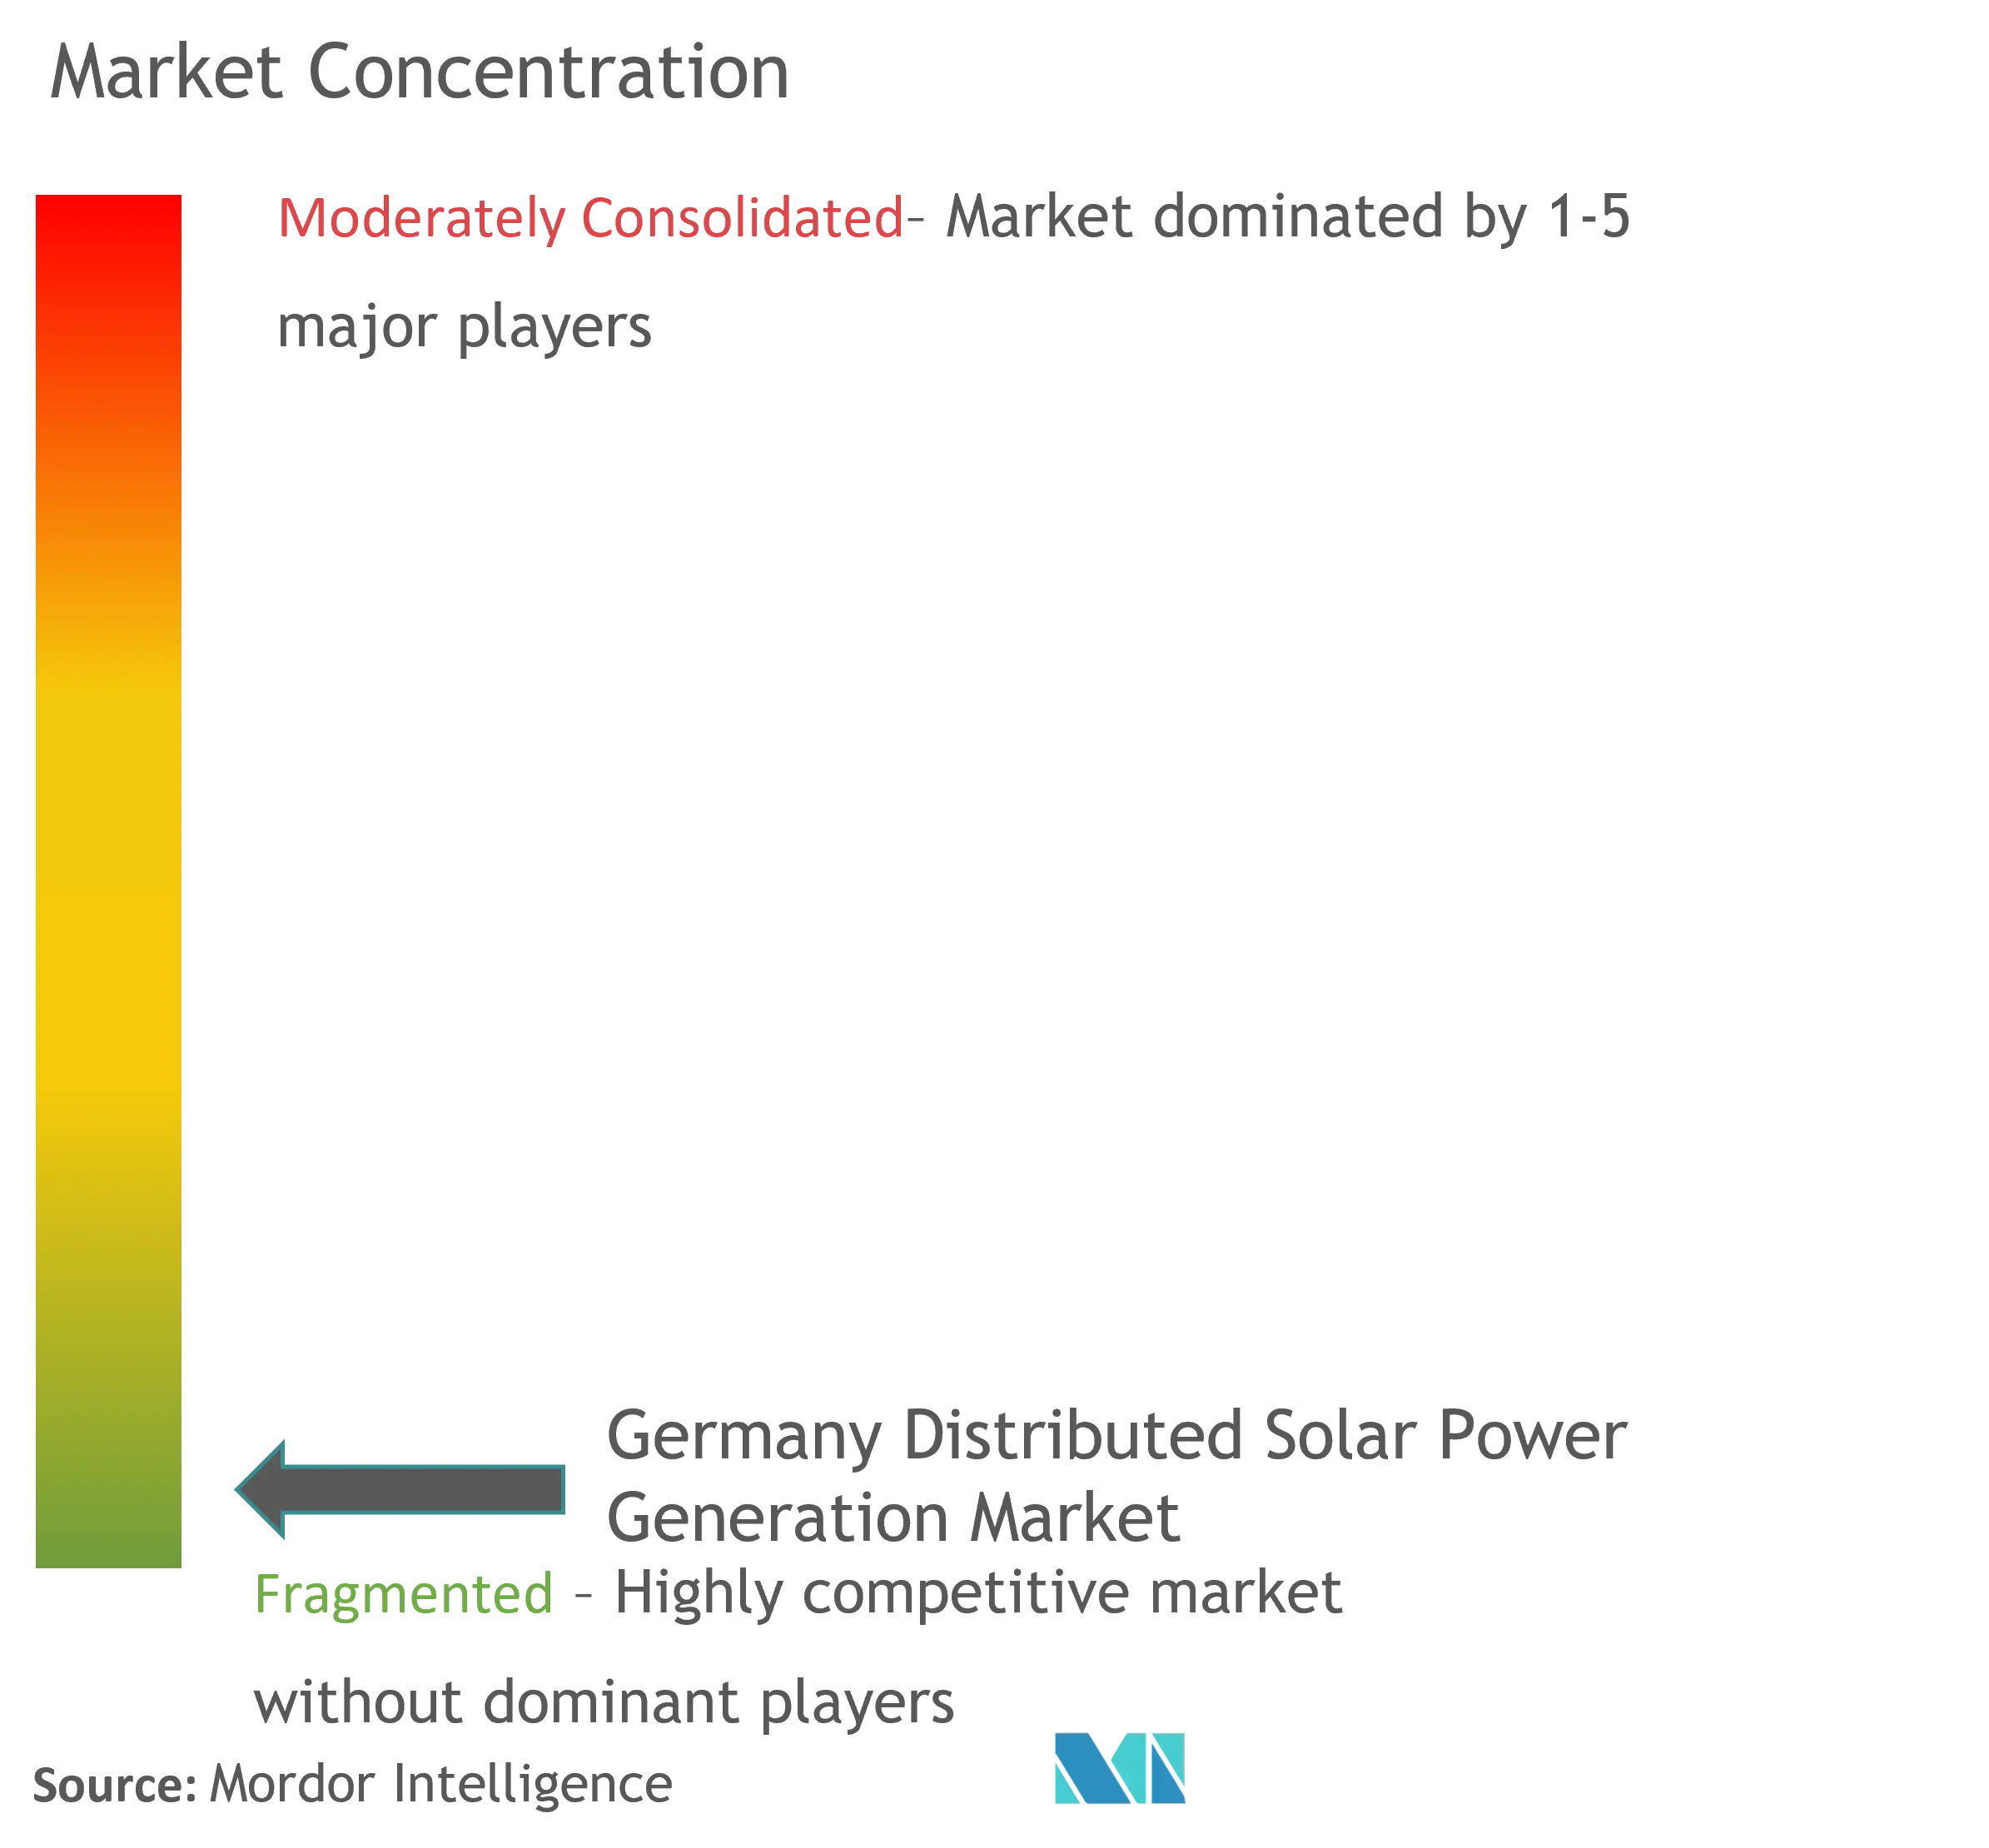 Germany Distributed Solar Power Generation Market Concentration